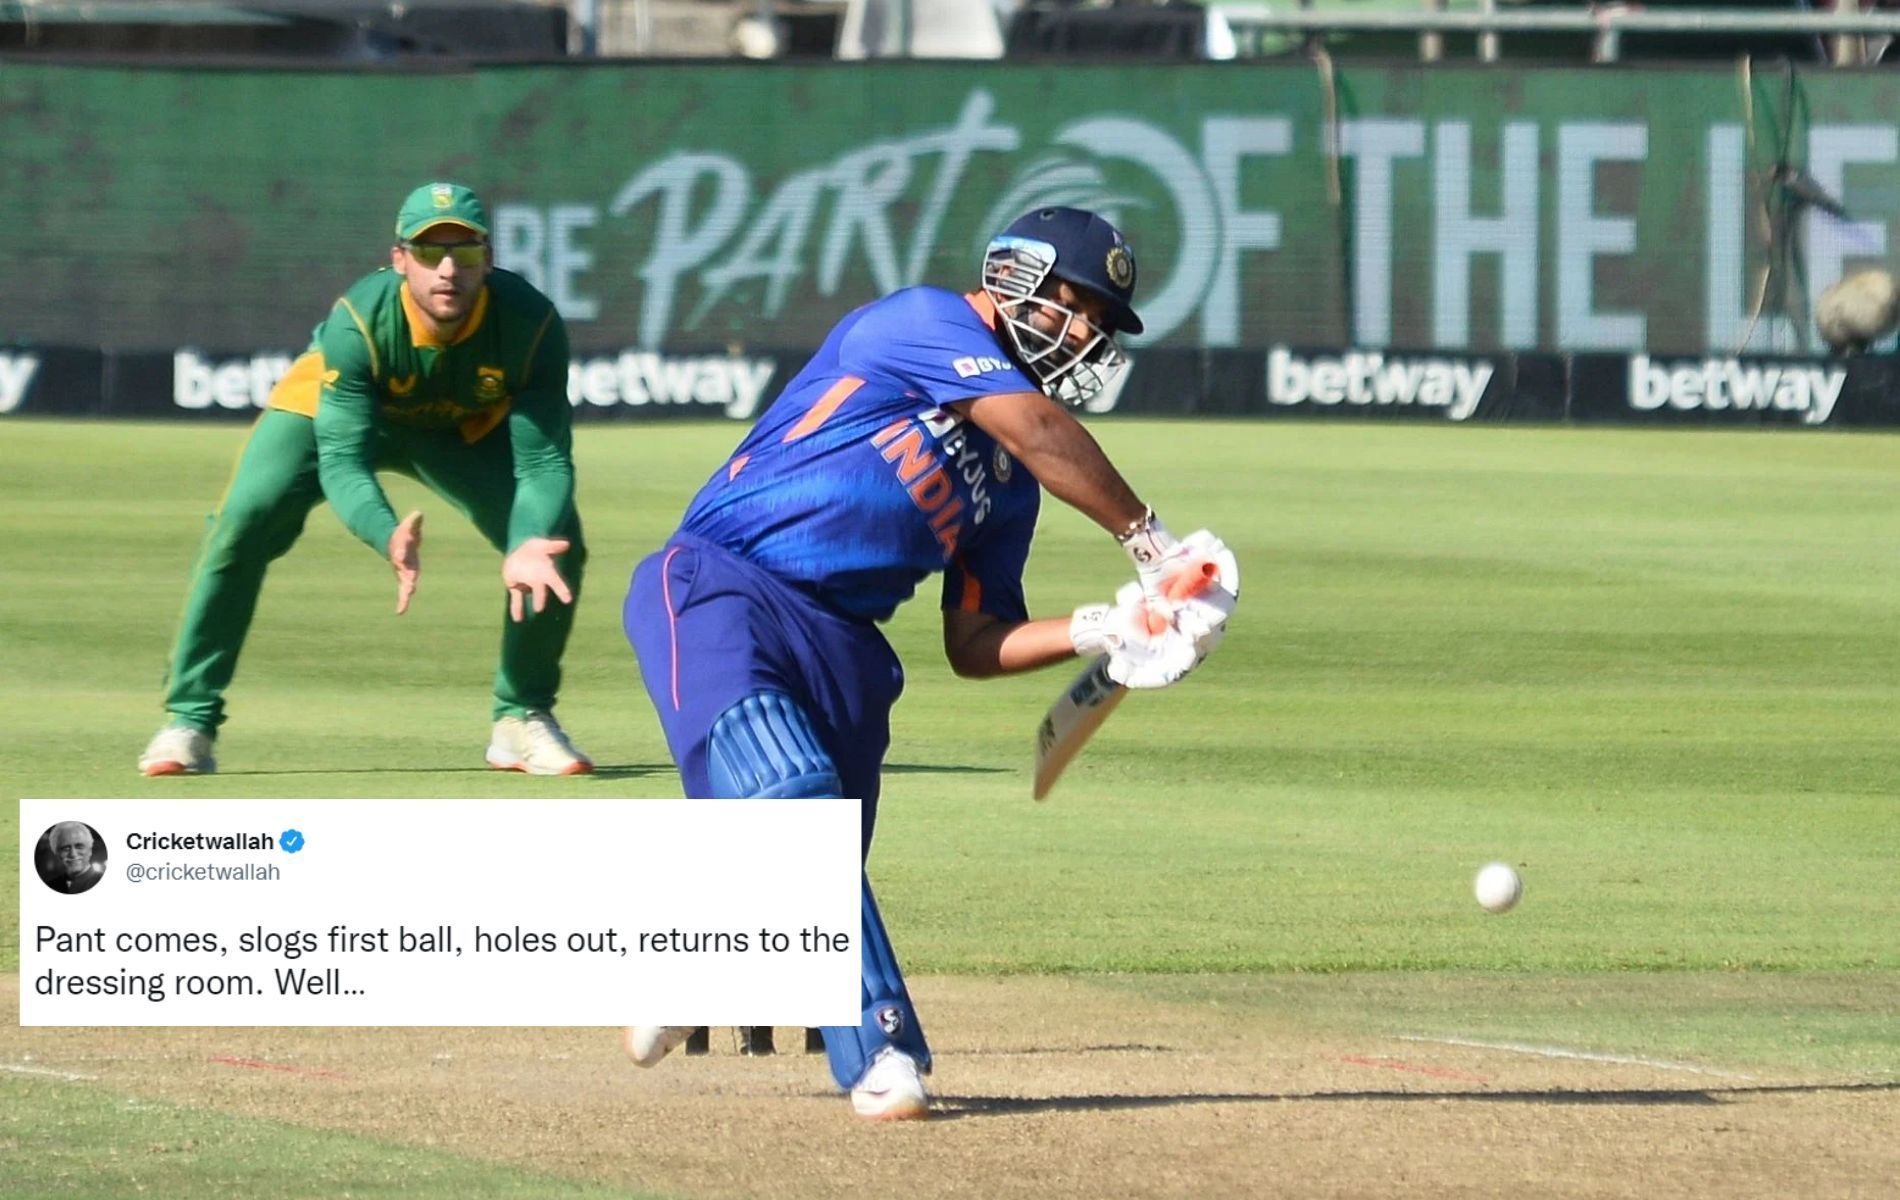 India wicketkeeper-Rishabh Pant got out trying hit big off his first delivery in the 3rd ODI vs South Africa.